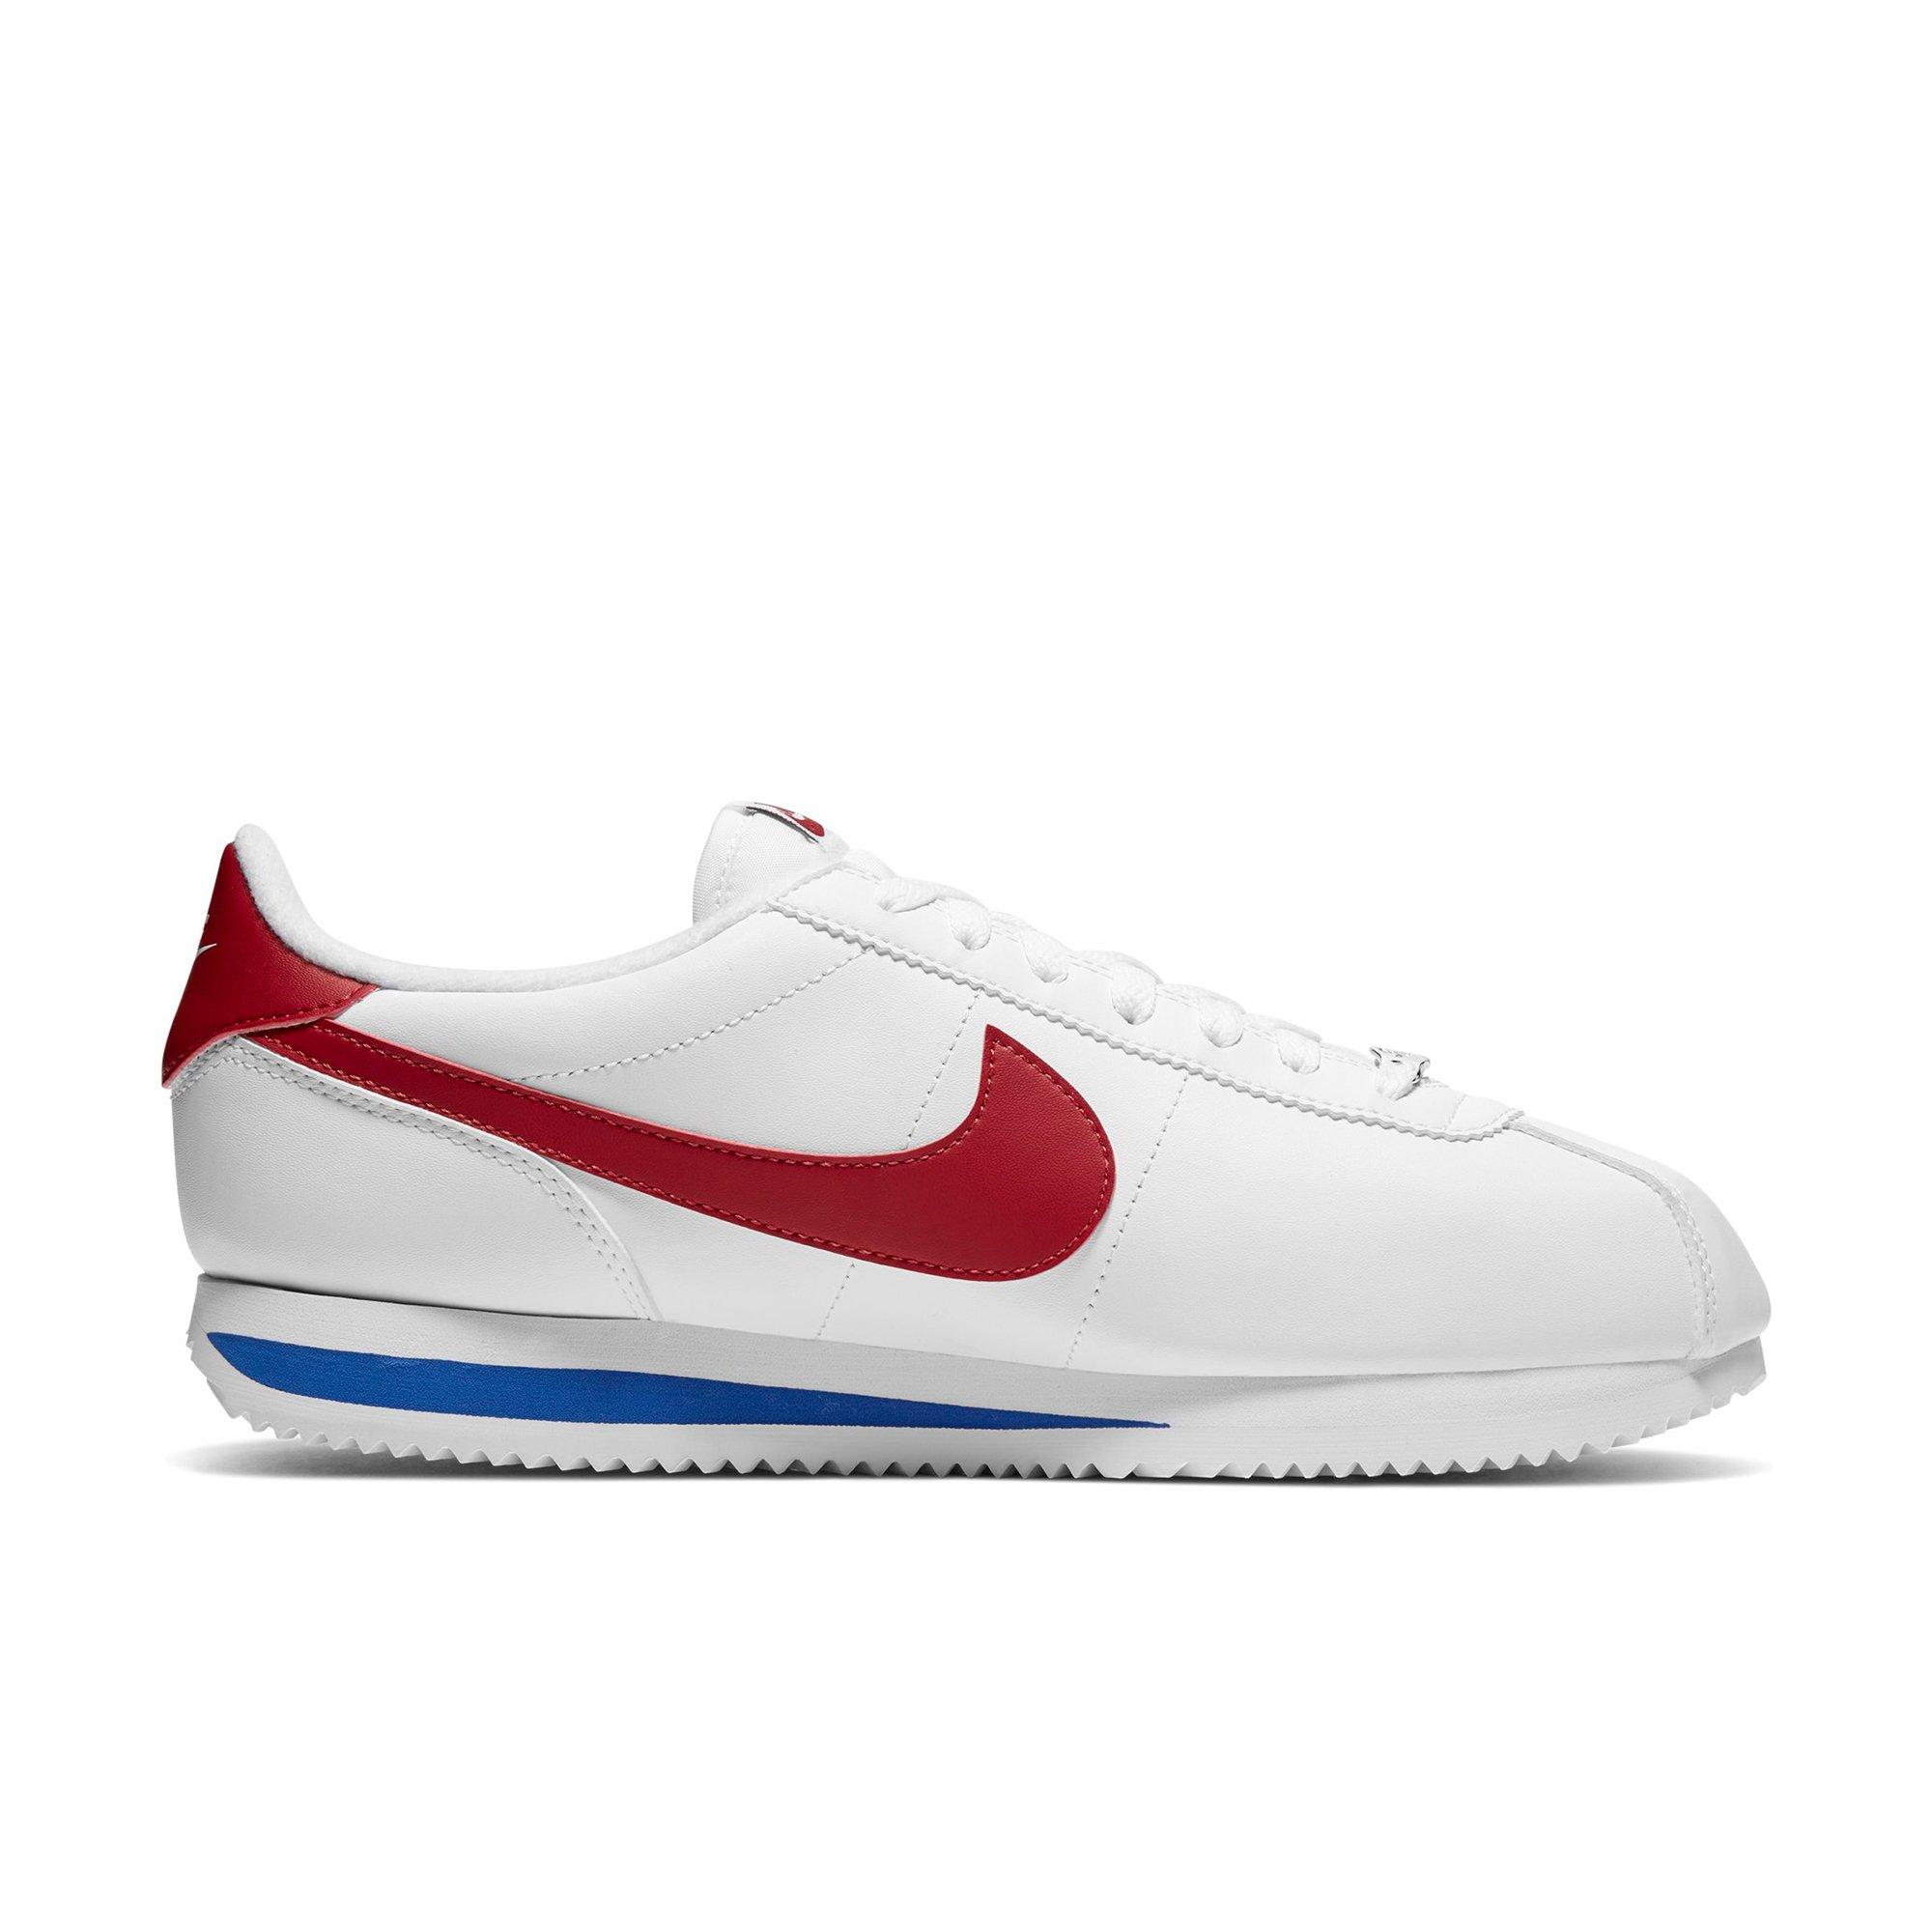 cortez nike red and blue